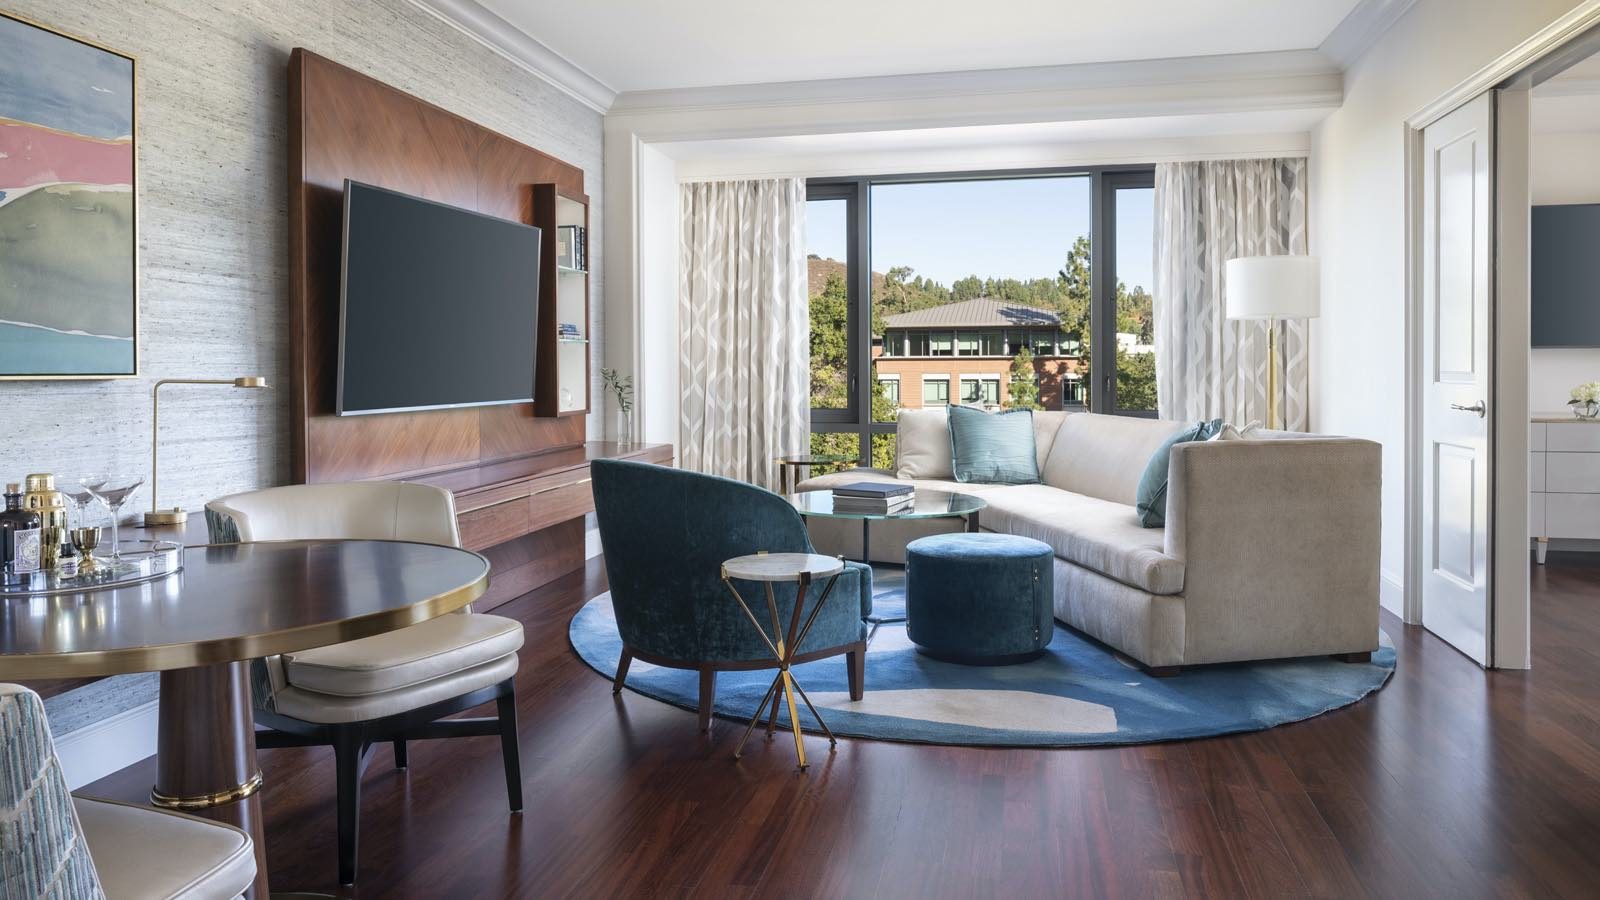 Four Seasons Westlake Village suite with view over gardens